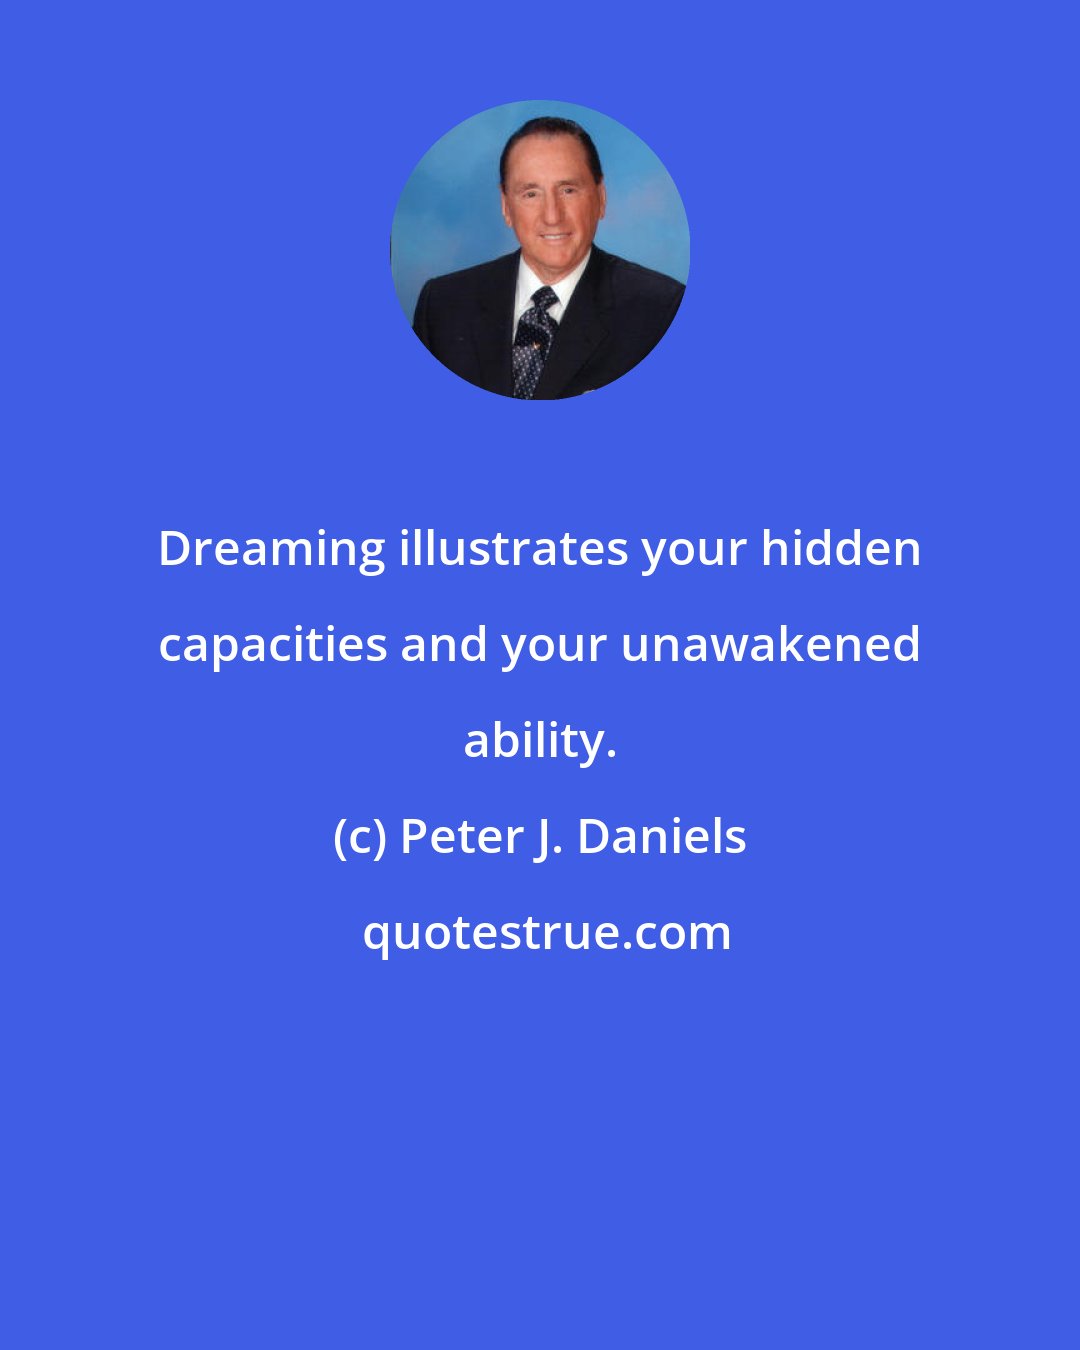 Peter J. Daniels: Dreaming illustrates your hidden capacities and your unawakened ability.